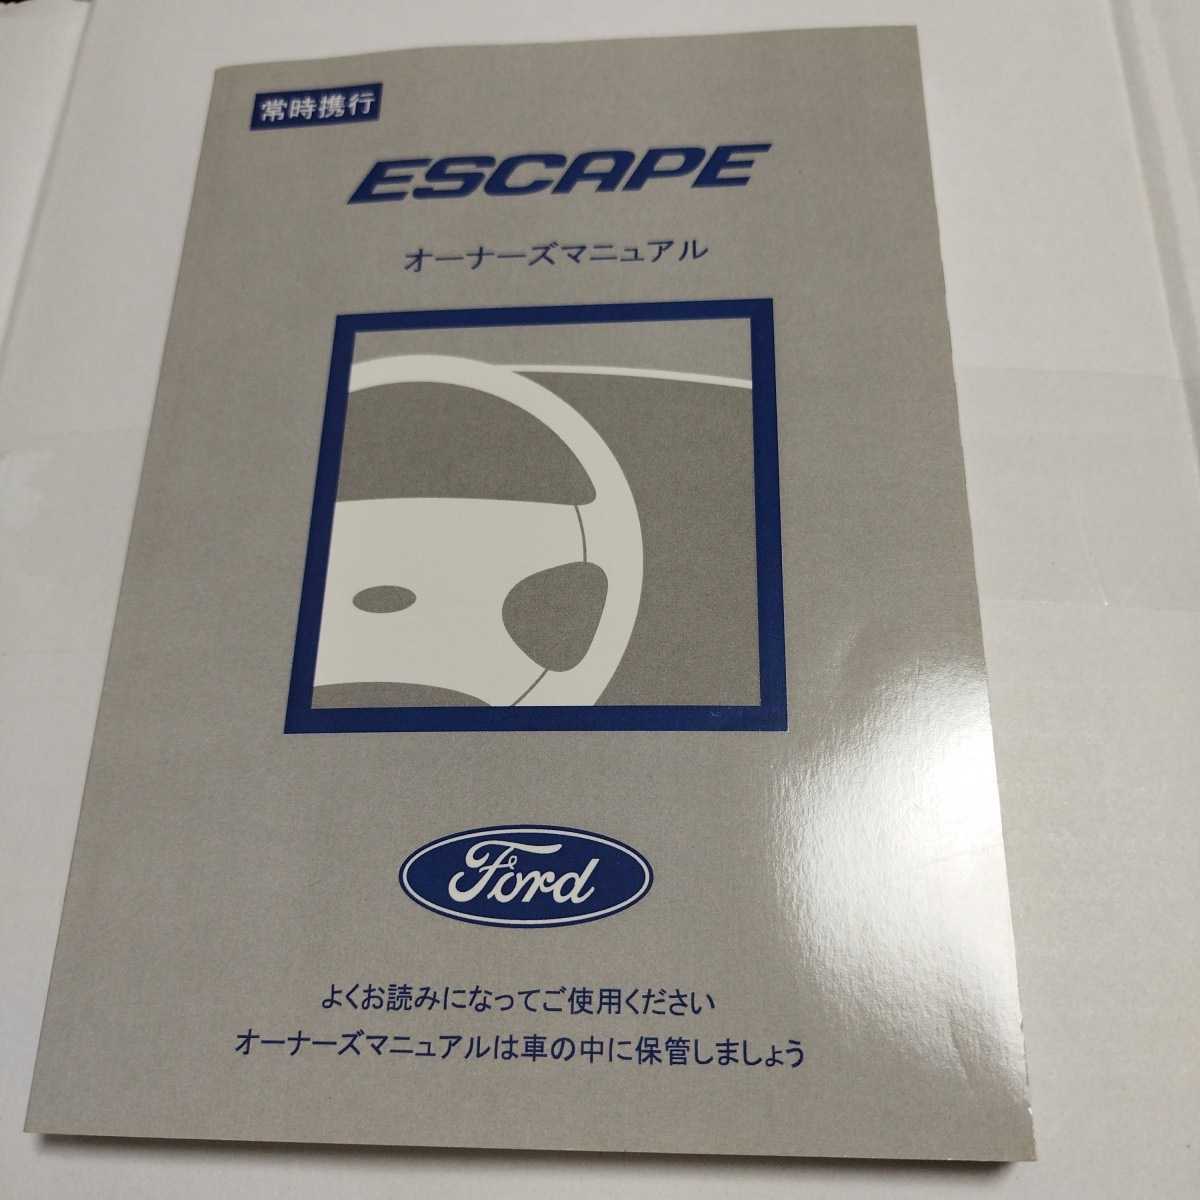 Ford Ford Escape owner manual manual owner's manual Japanese edition 2012 year Heisei era 24 year 